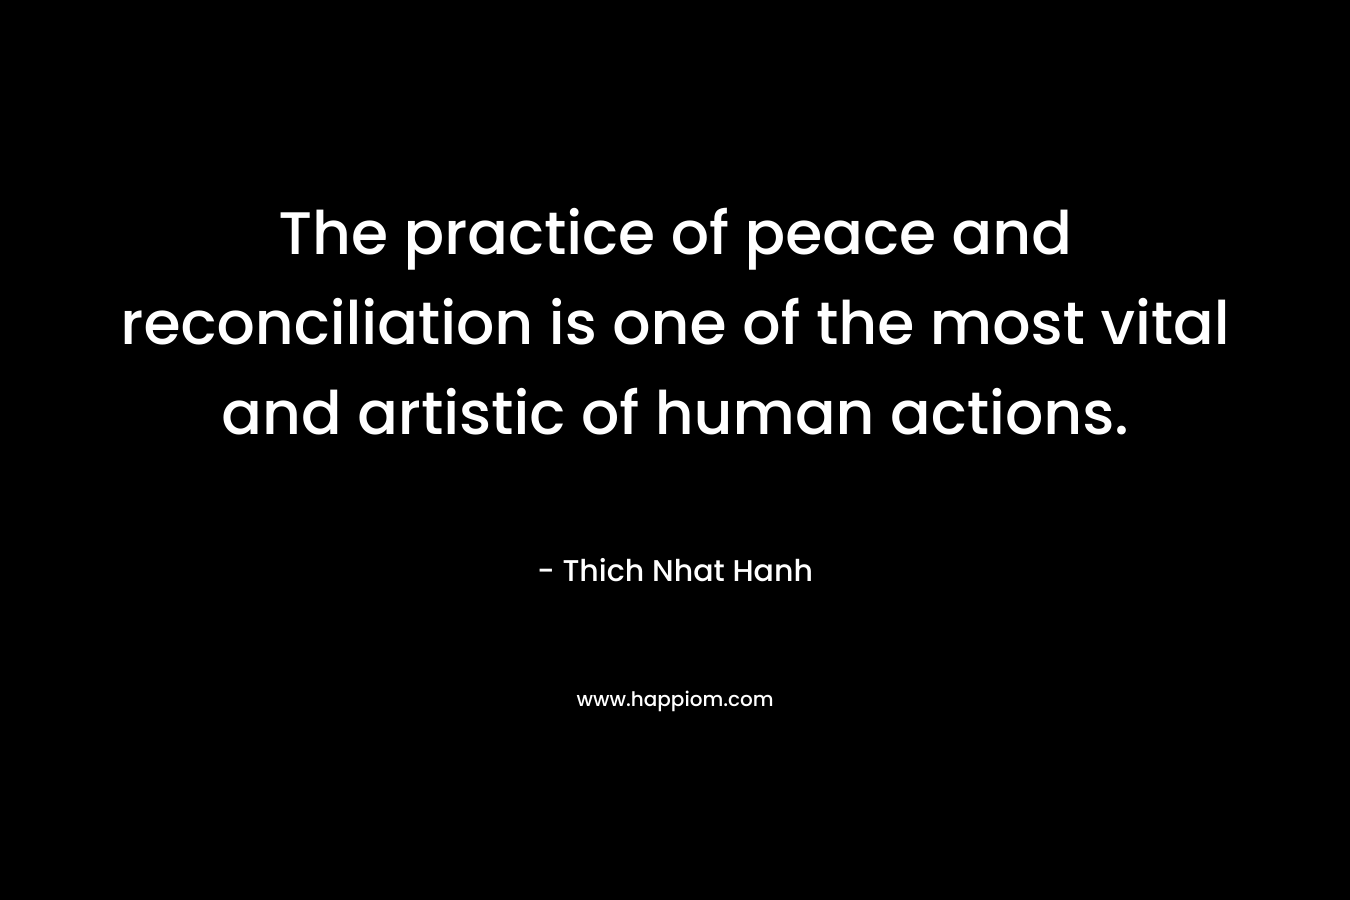 The practice of peace and reconciliation is one of the most vital and artistic of human actions.